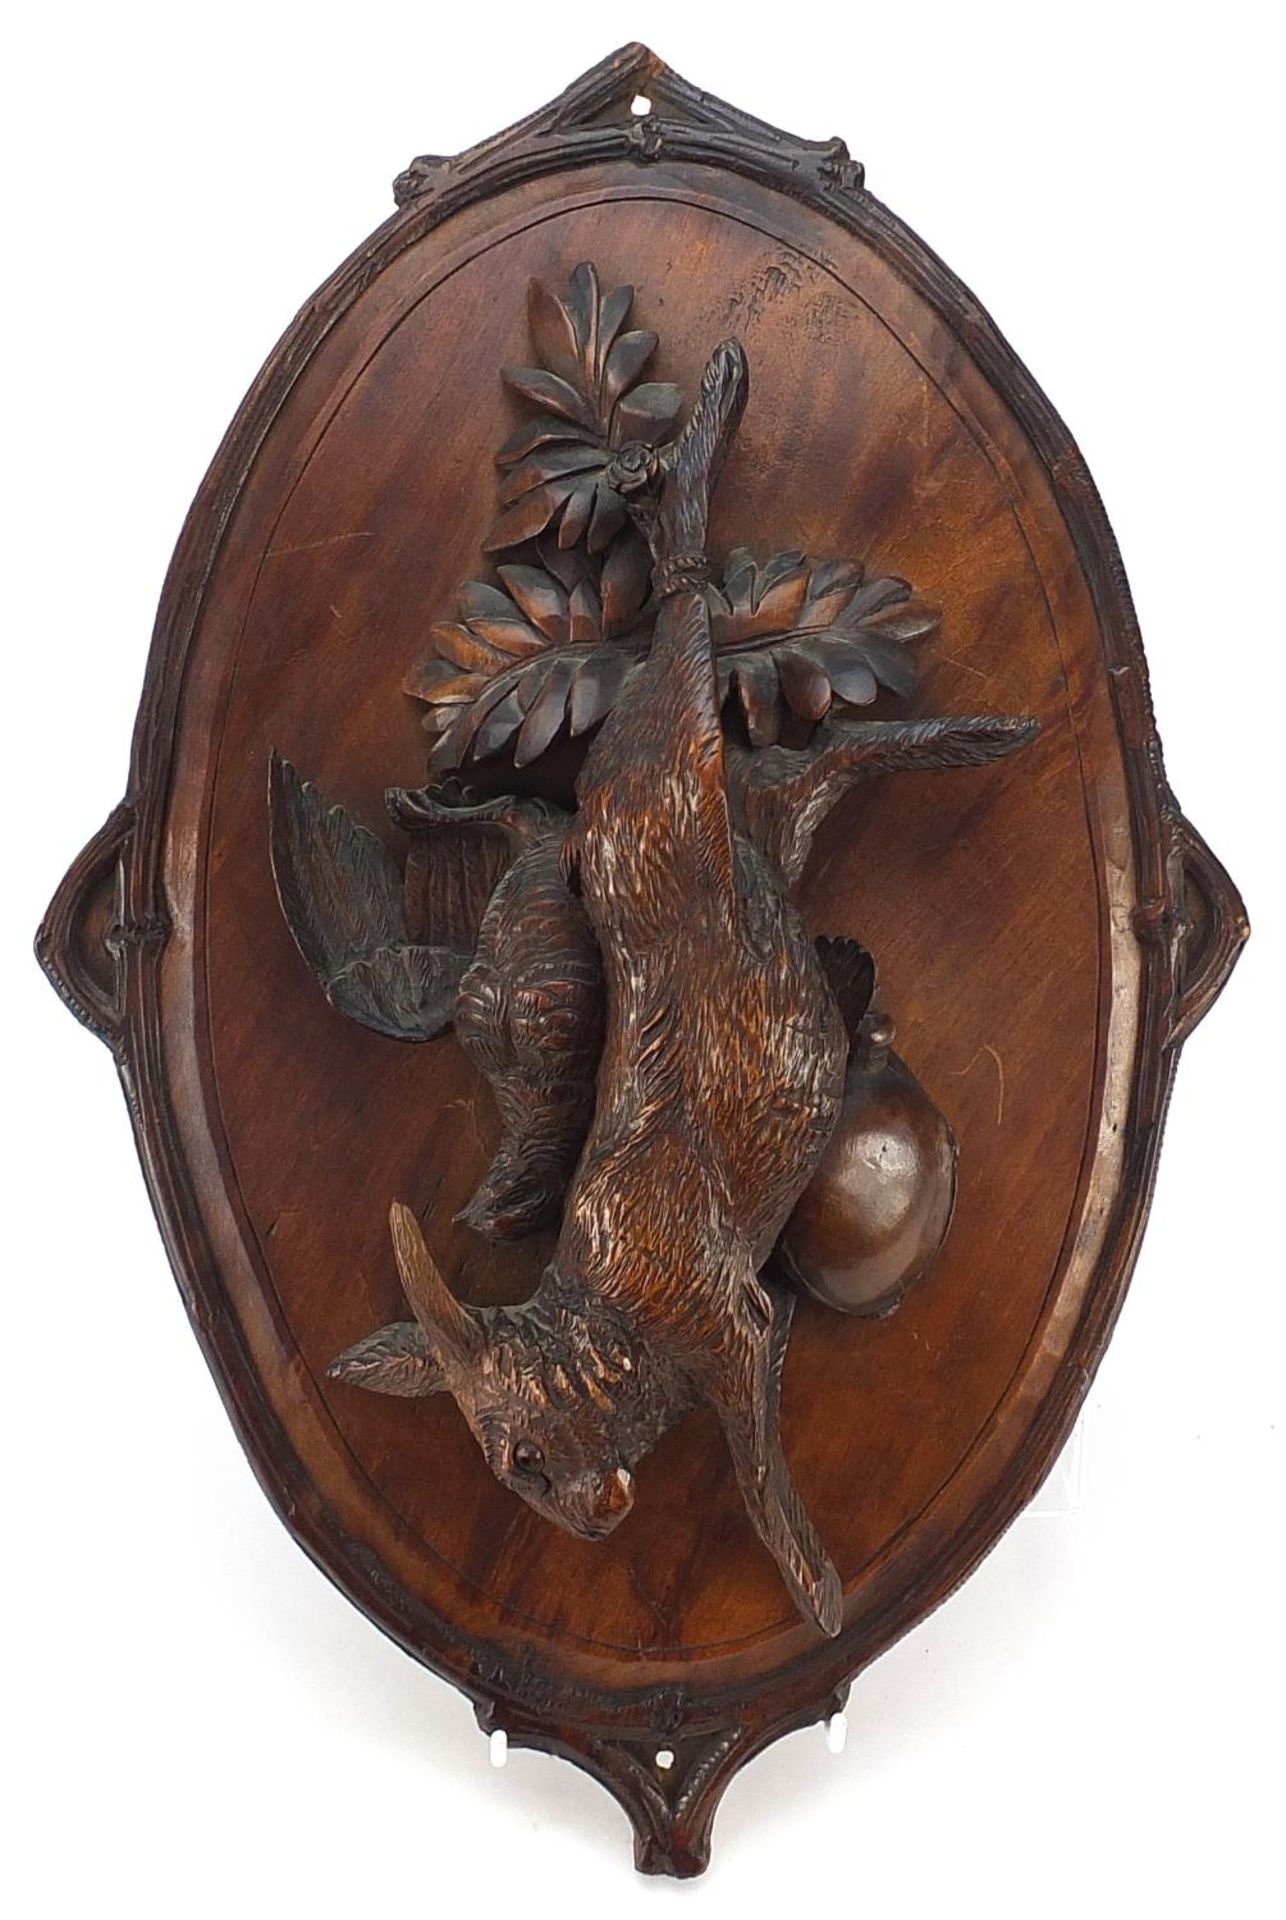 19th century German Black Forest hunting trophy plaque carved in relief with hanging game and birds,